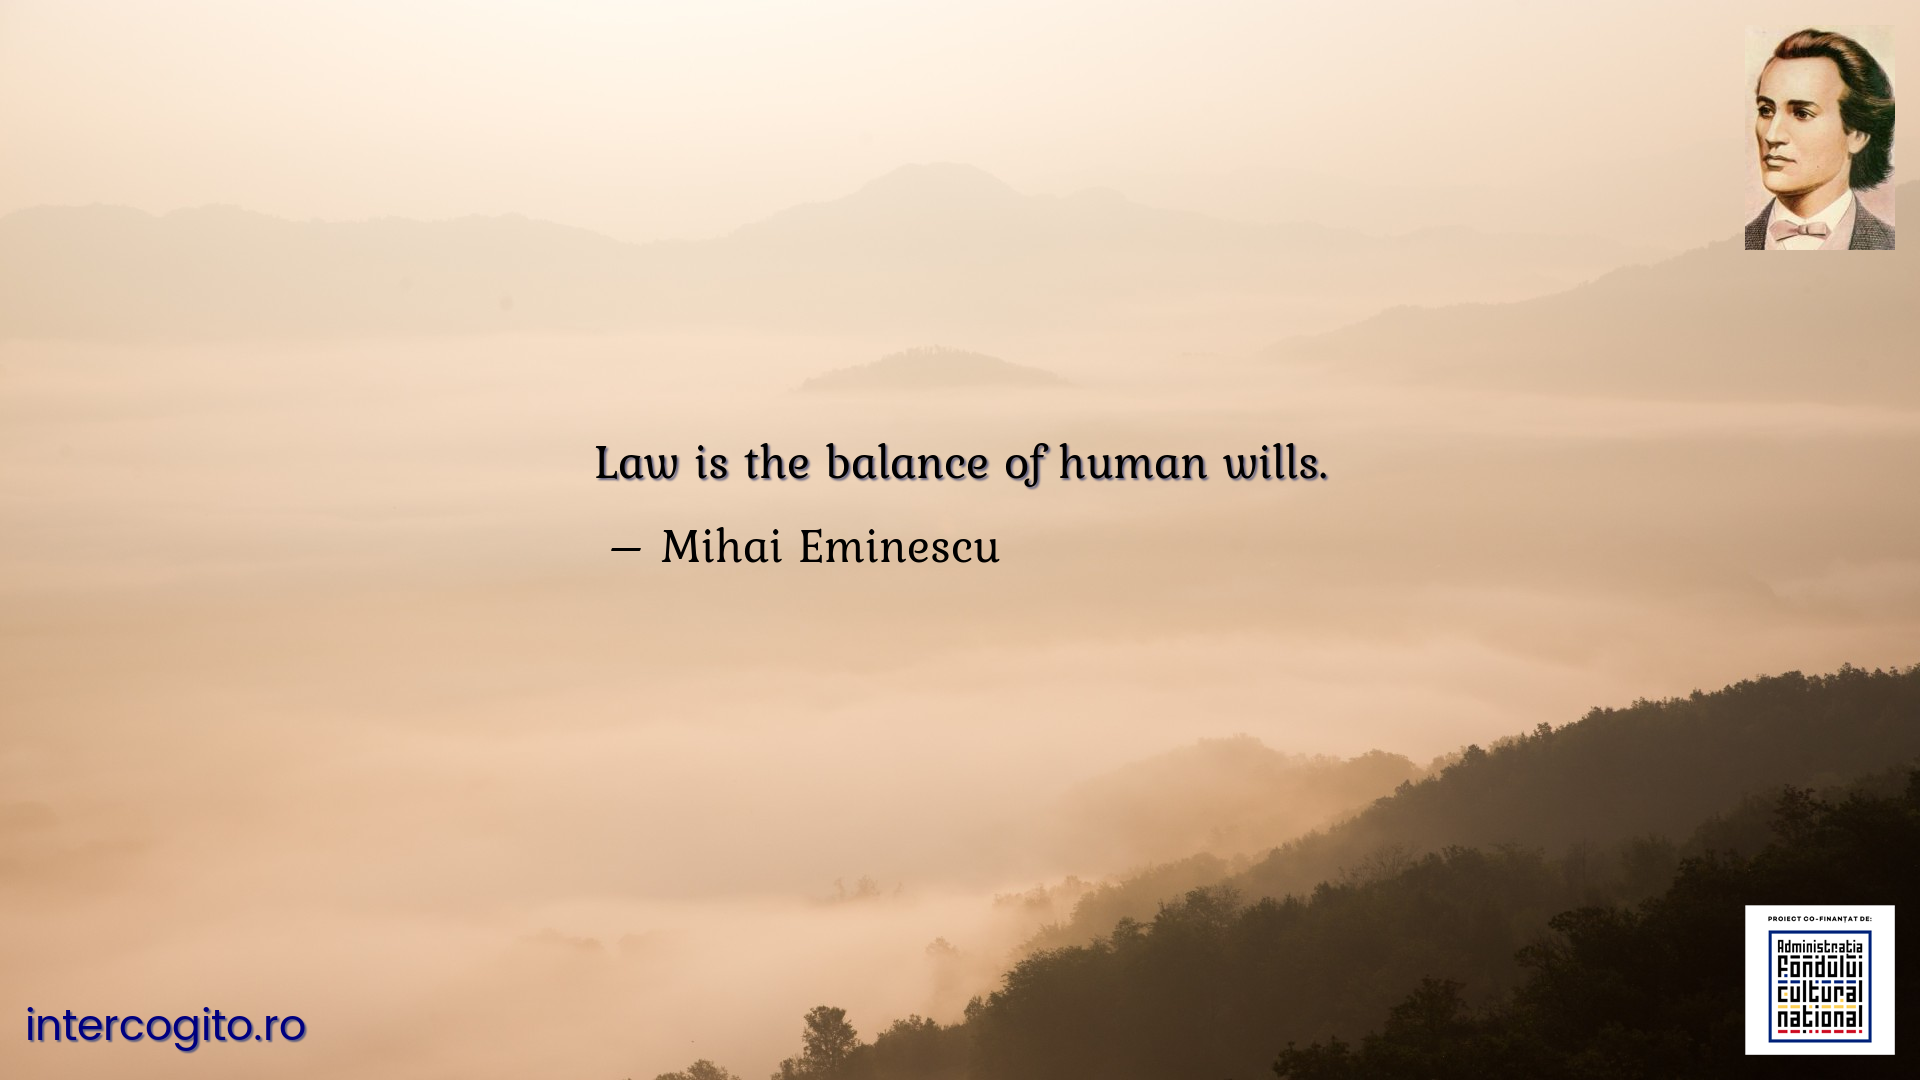 Law is the balance of human wills.